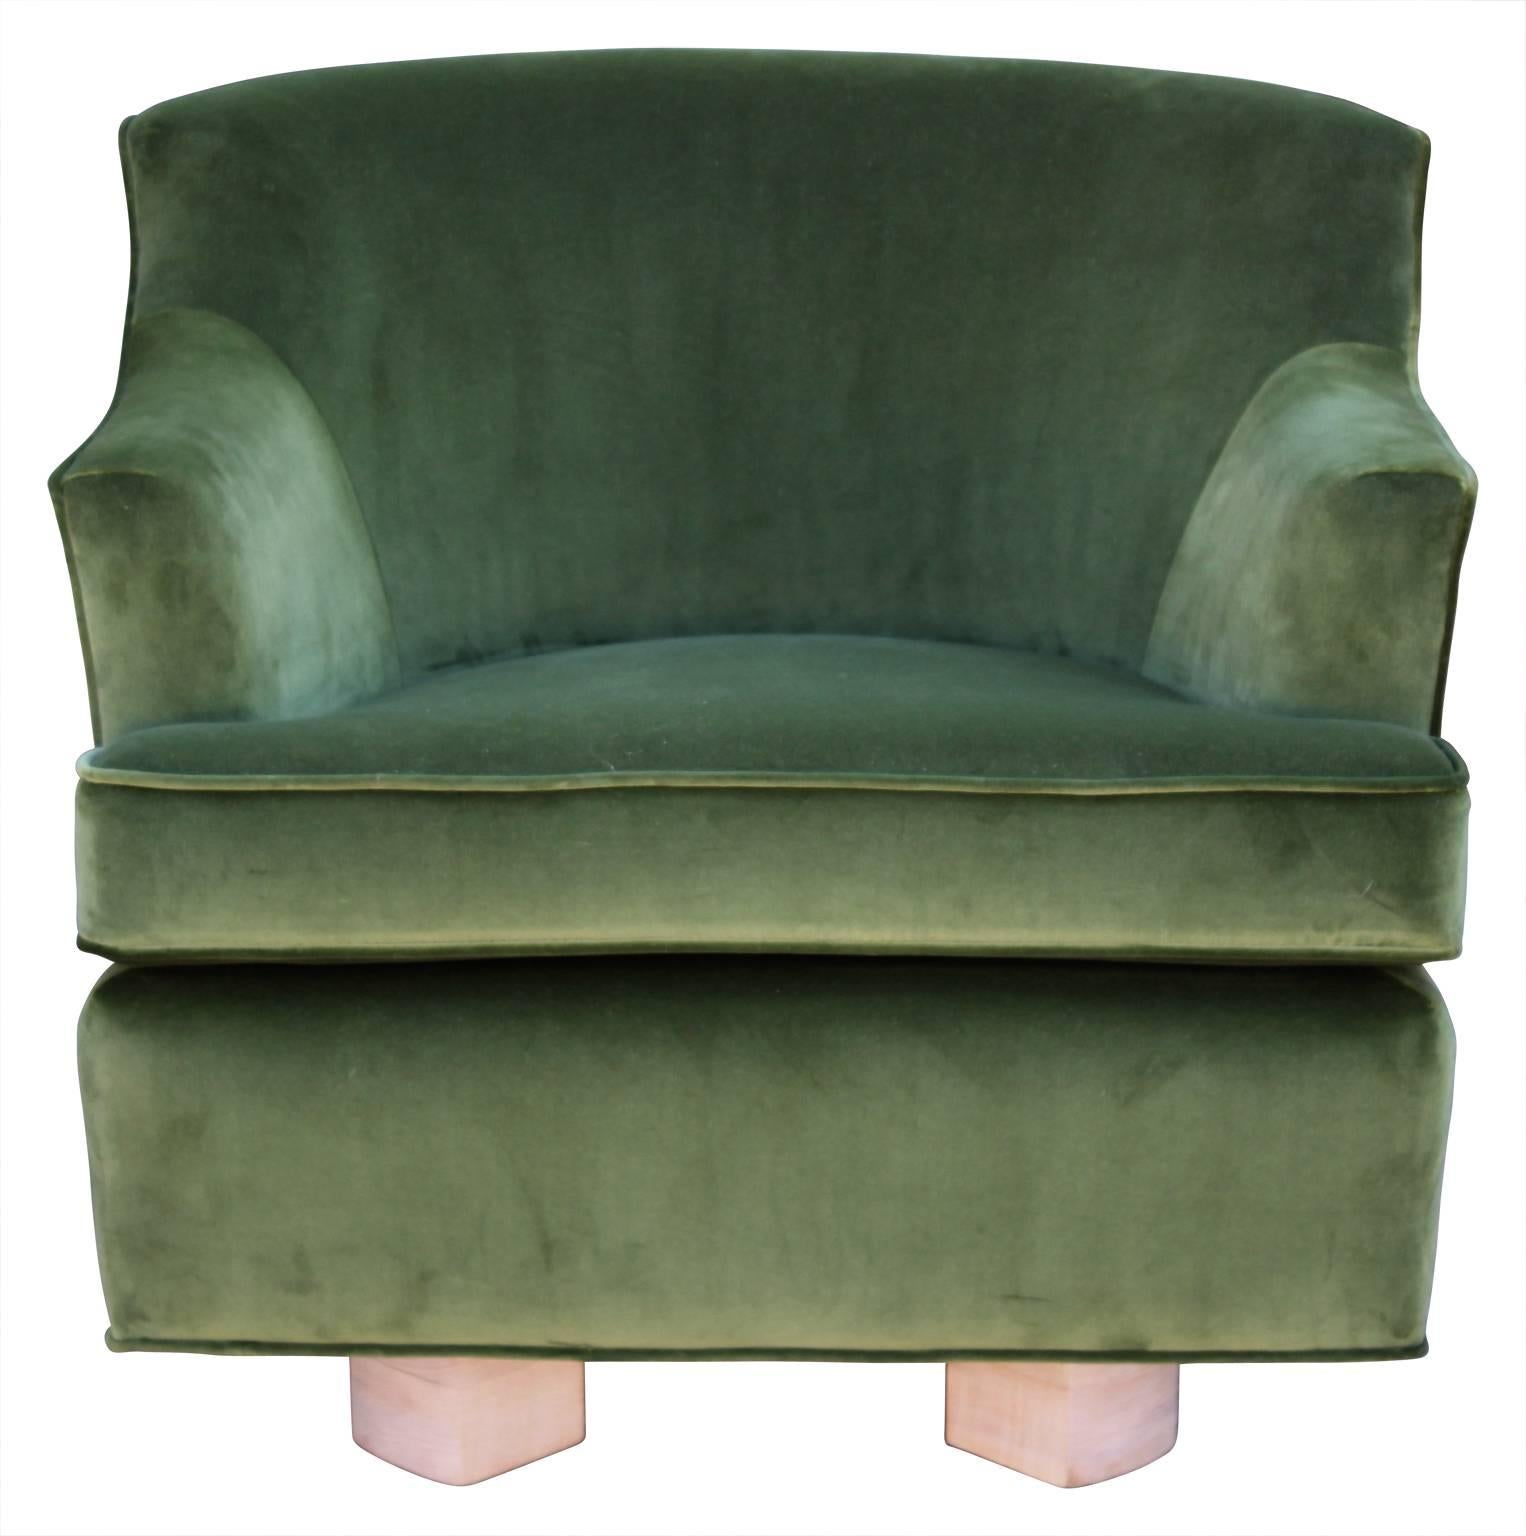 Unique swivel lounge chair with a bleached wood base and upholstered in deep green velvet in the style of Grosfeld House.